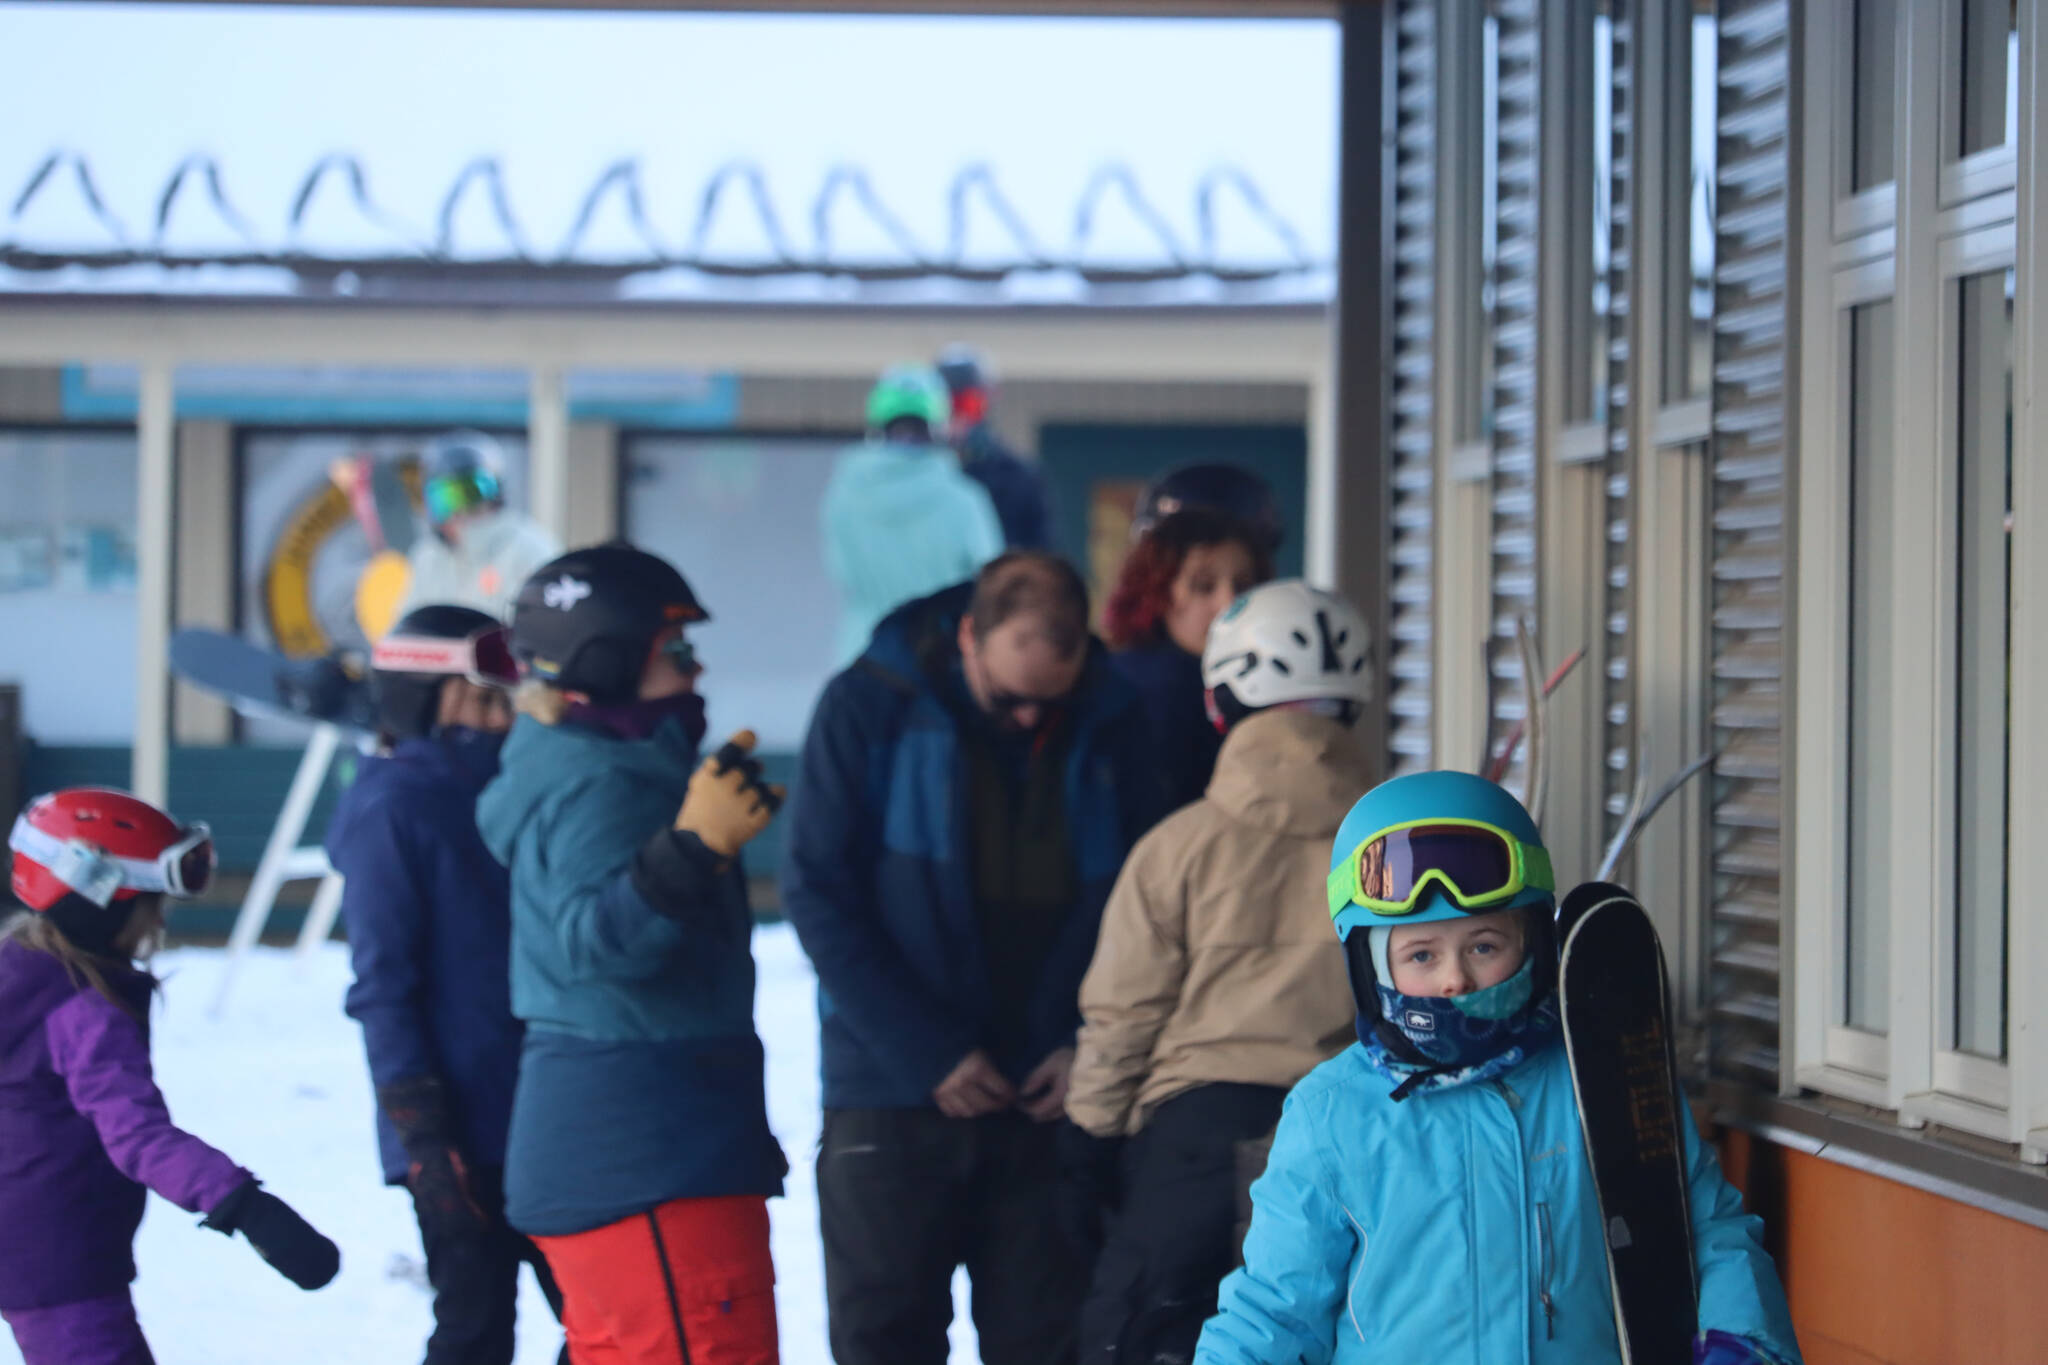 Juneau crowds flock to Eaglecrest Ski Area on Saturday to enjoy the official opening of the ski season. The mountain was limited to only utilizing the Porcupine Chairlift, but additional lifts are expected to open in the coming months, according to staff. (Jonson Kuhn / Juneau Empire)